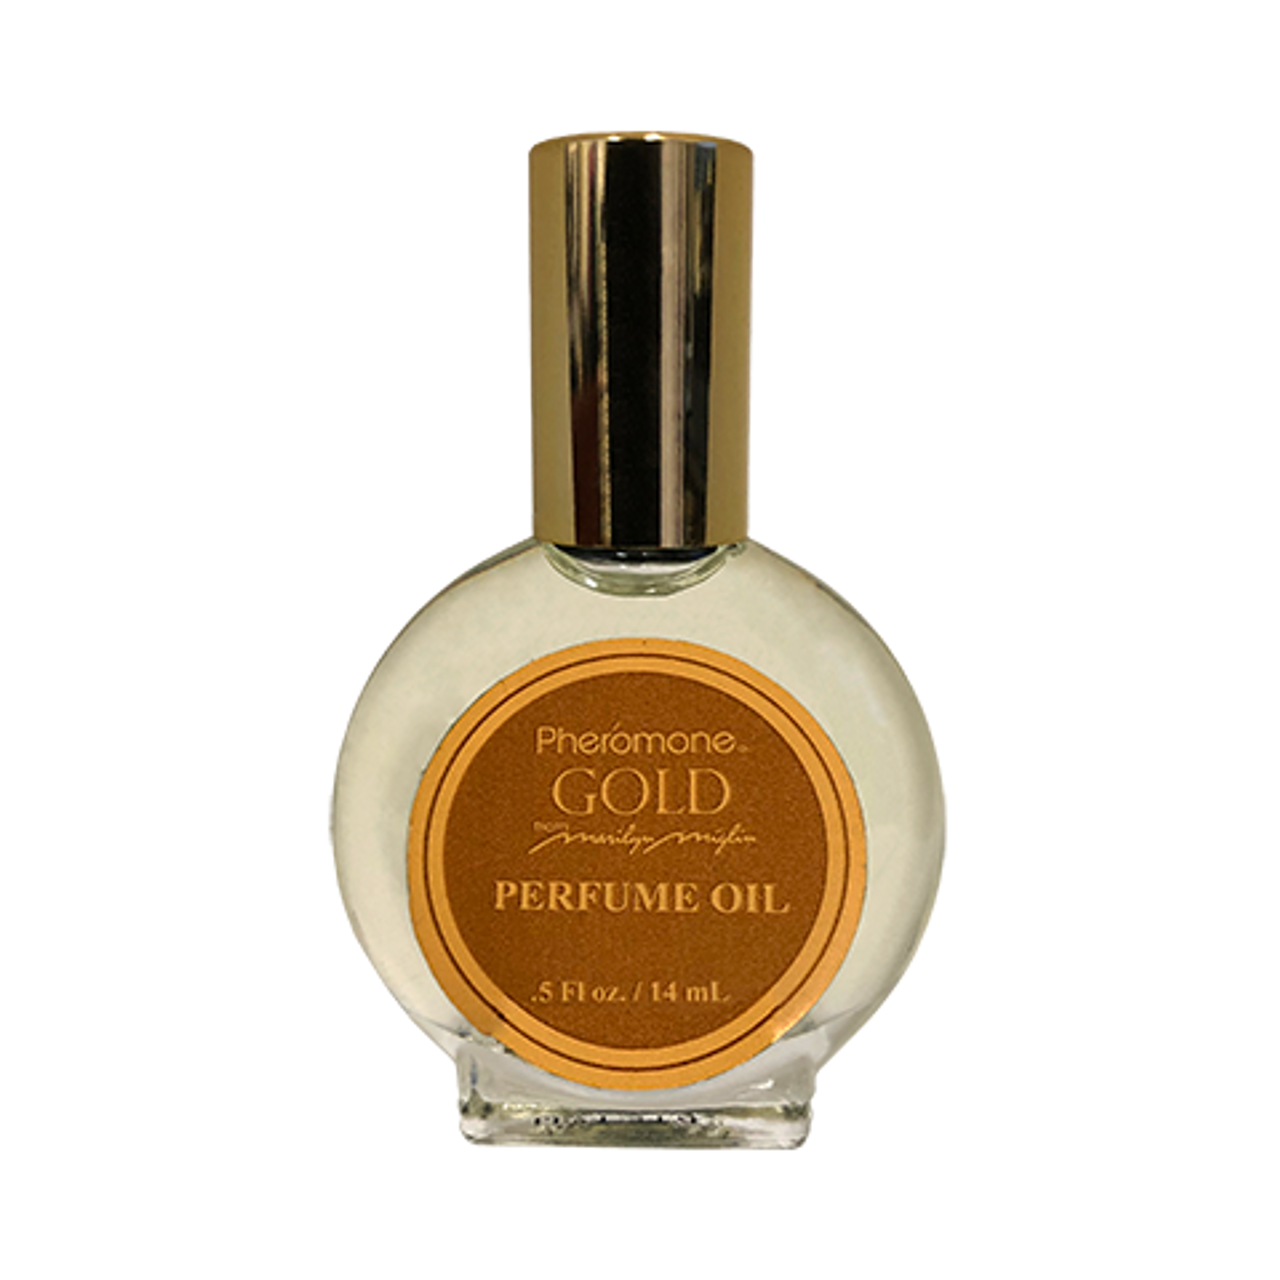 https://cdn11.bigcommerce.com/s-5ge5cvg/images/stencil/1280x1280/products/2469/3898/0279250_pher_gold_perfume_oil_thumbnail__00798.1617285012.png?c=2